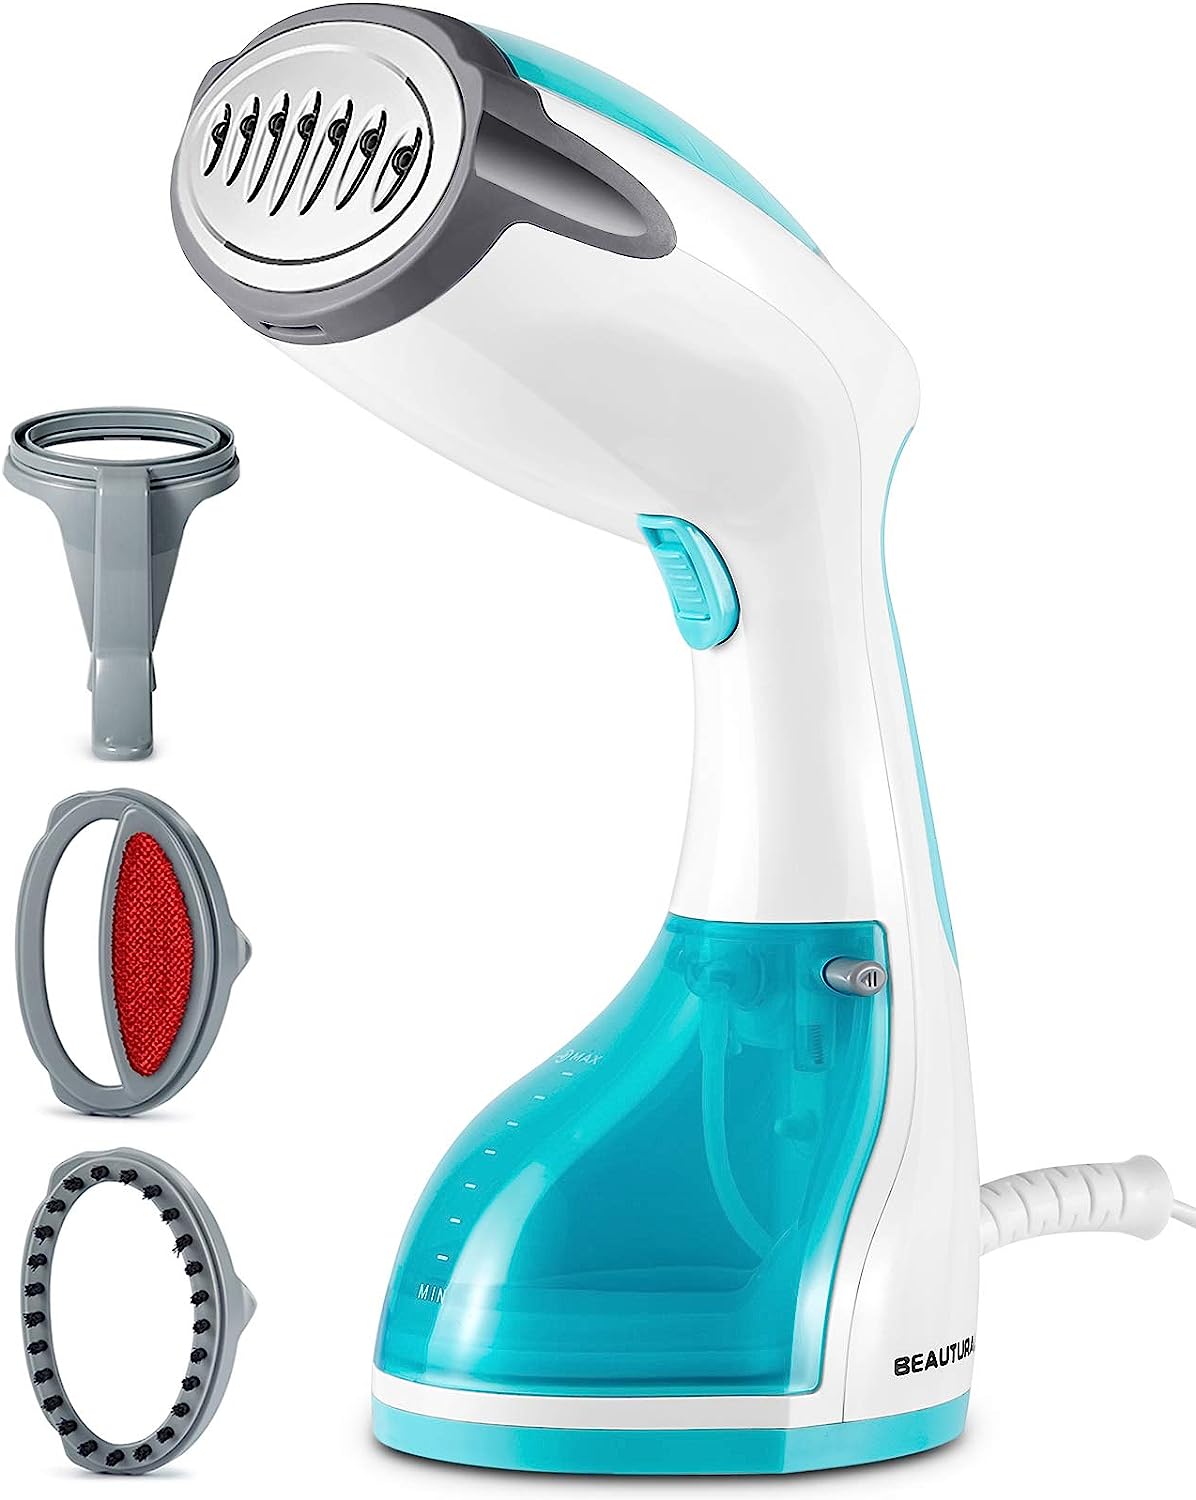 BEAUTURAL Steamer for Clothes, Portable Handheld [...]